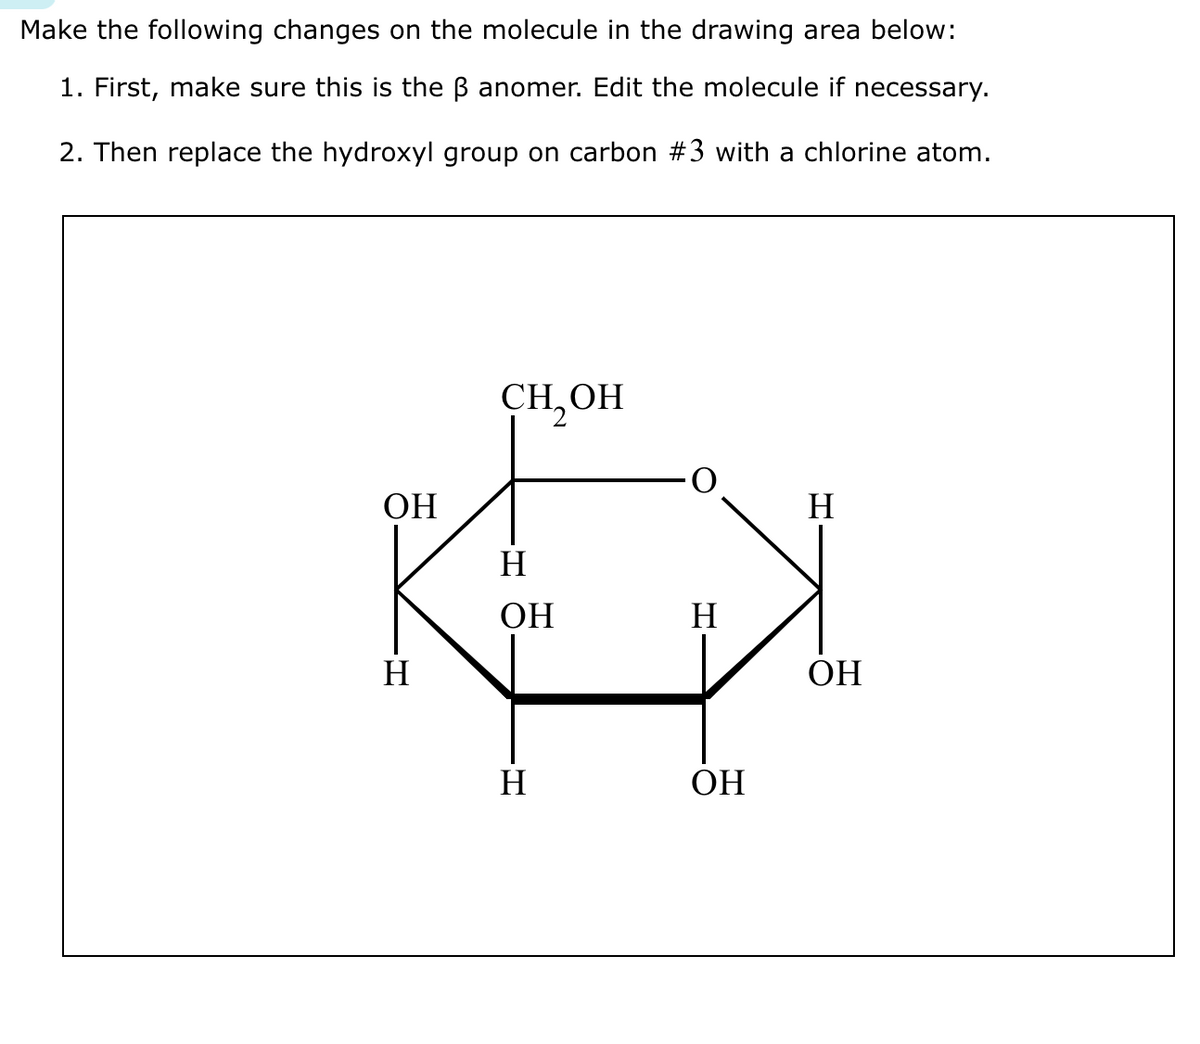 Make the following changes on the molecule in the drawing area below:
1. First, make sure this is the ß anomer. Edit the molecule if necessary.
2. Then replace the hydroxyl group on carbon #3 with a chlorine atom.
ОН
H
CH₂OH
H
ОН
Н
Н
ОН
Н
ОН